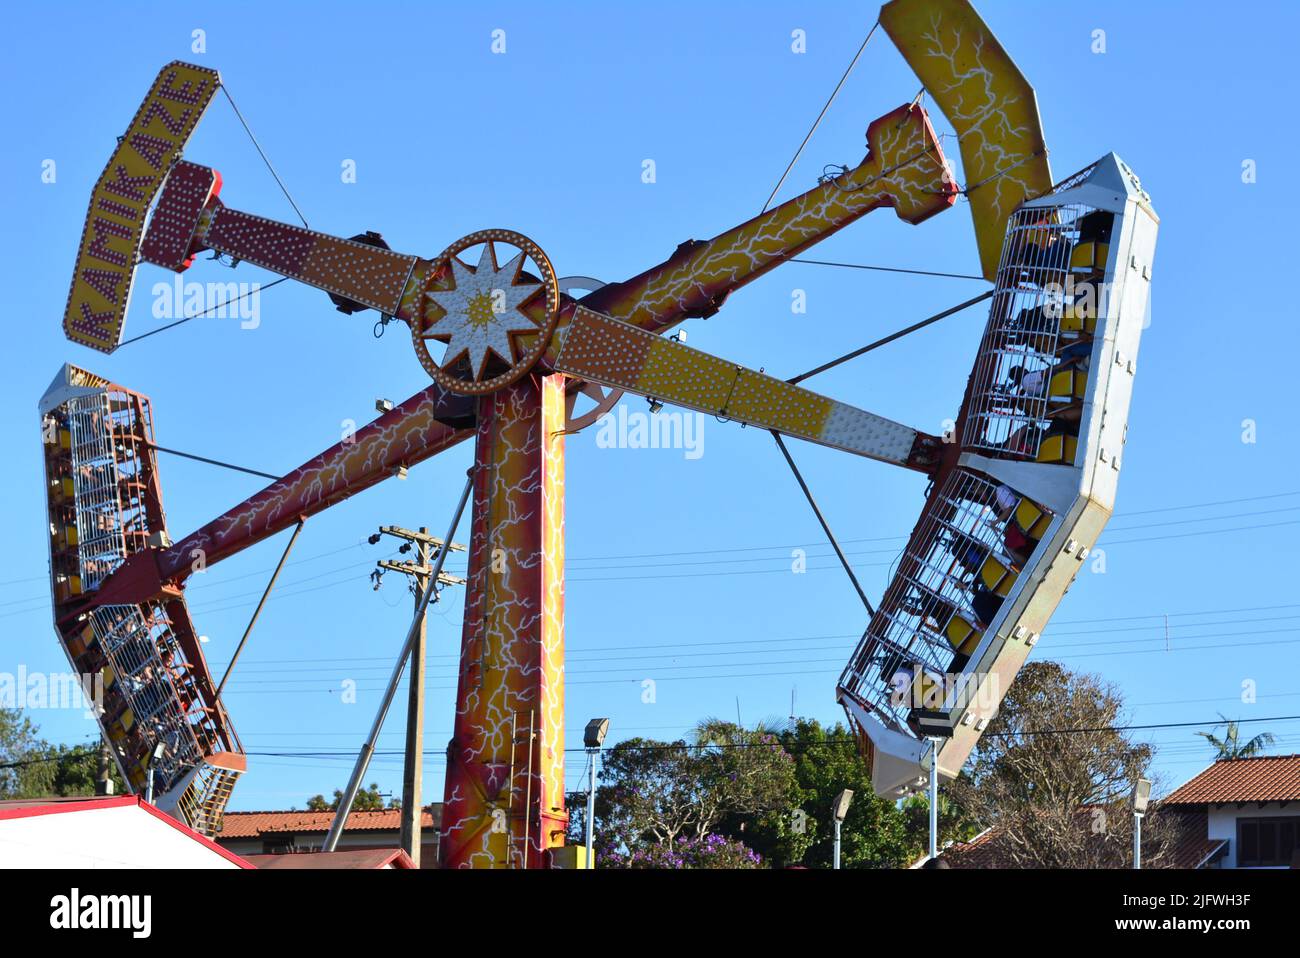 Extreme toy closed in amusement park where the participant stands upside down, Brazil, pendulum style, Brazil, South America, Latin America Stock Photo